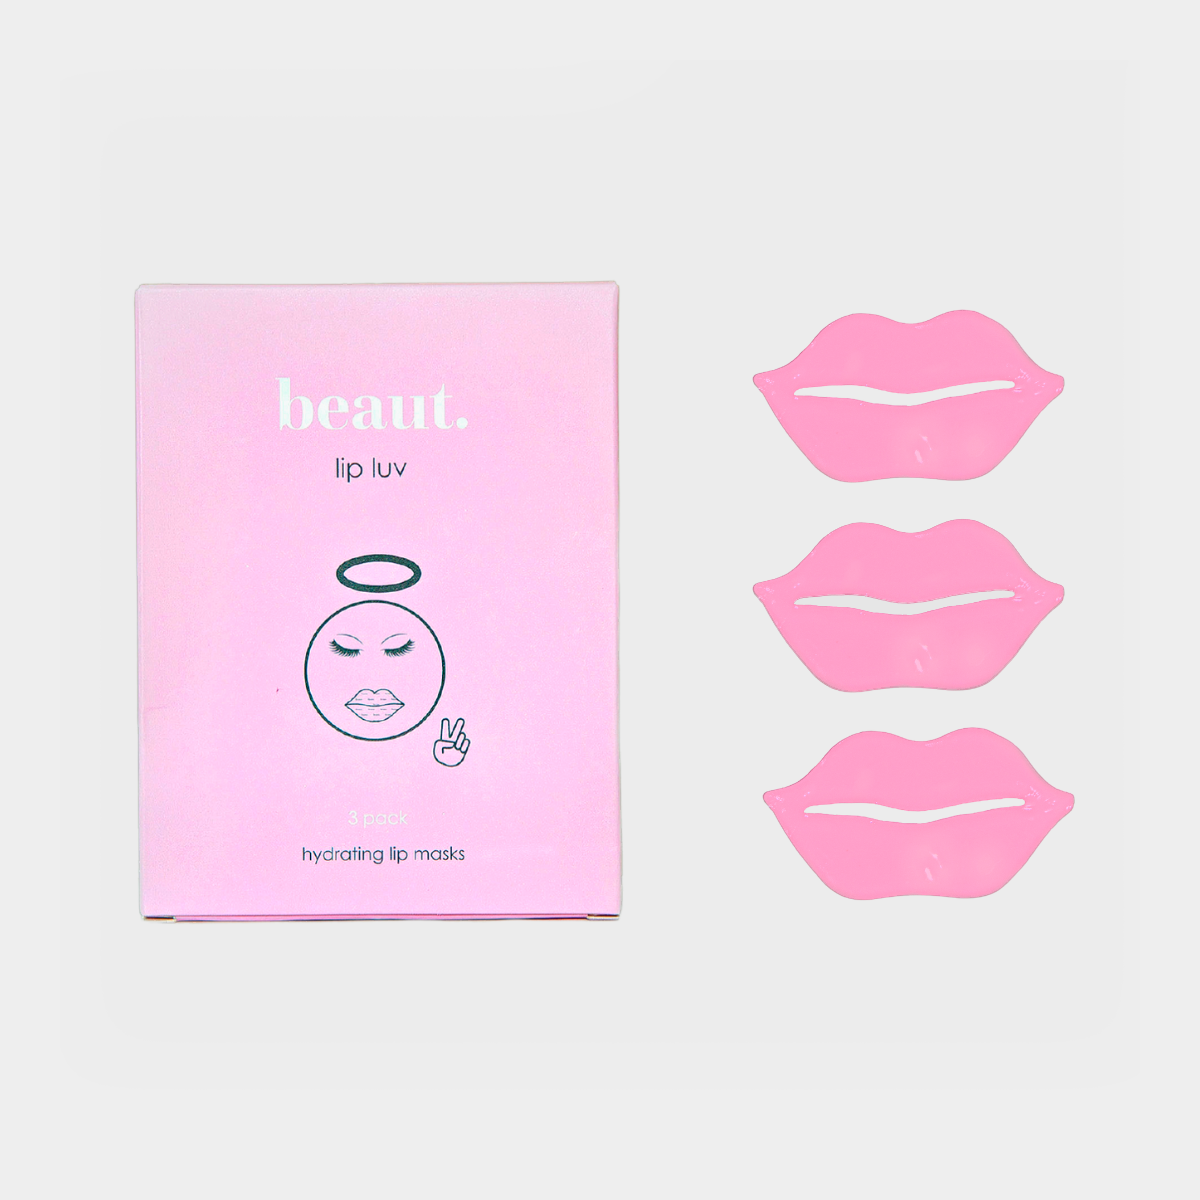 Lip luv hydrating 3 pack pink lip masks by Beaut.